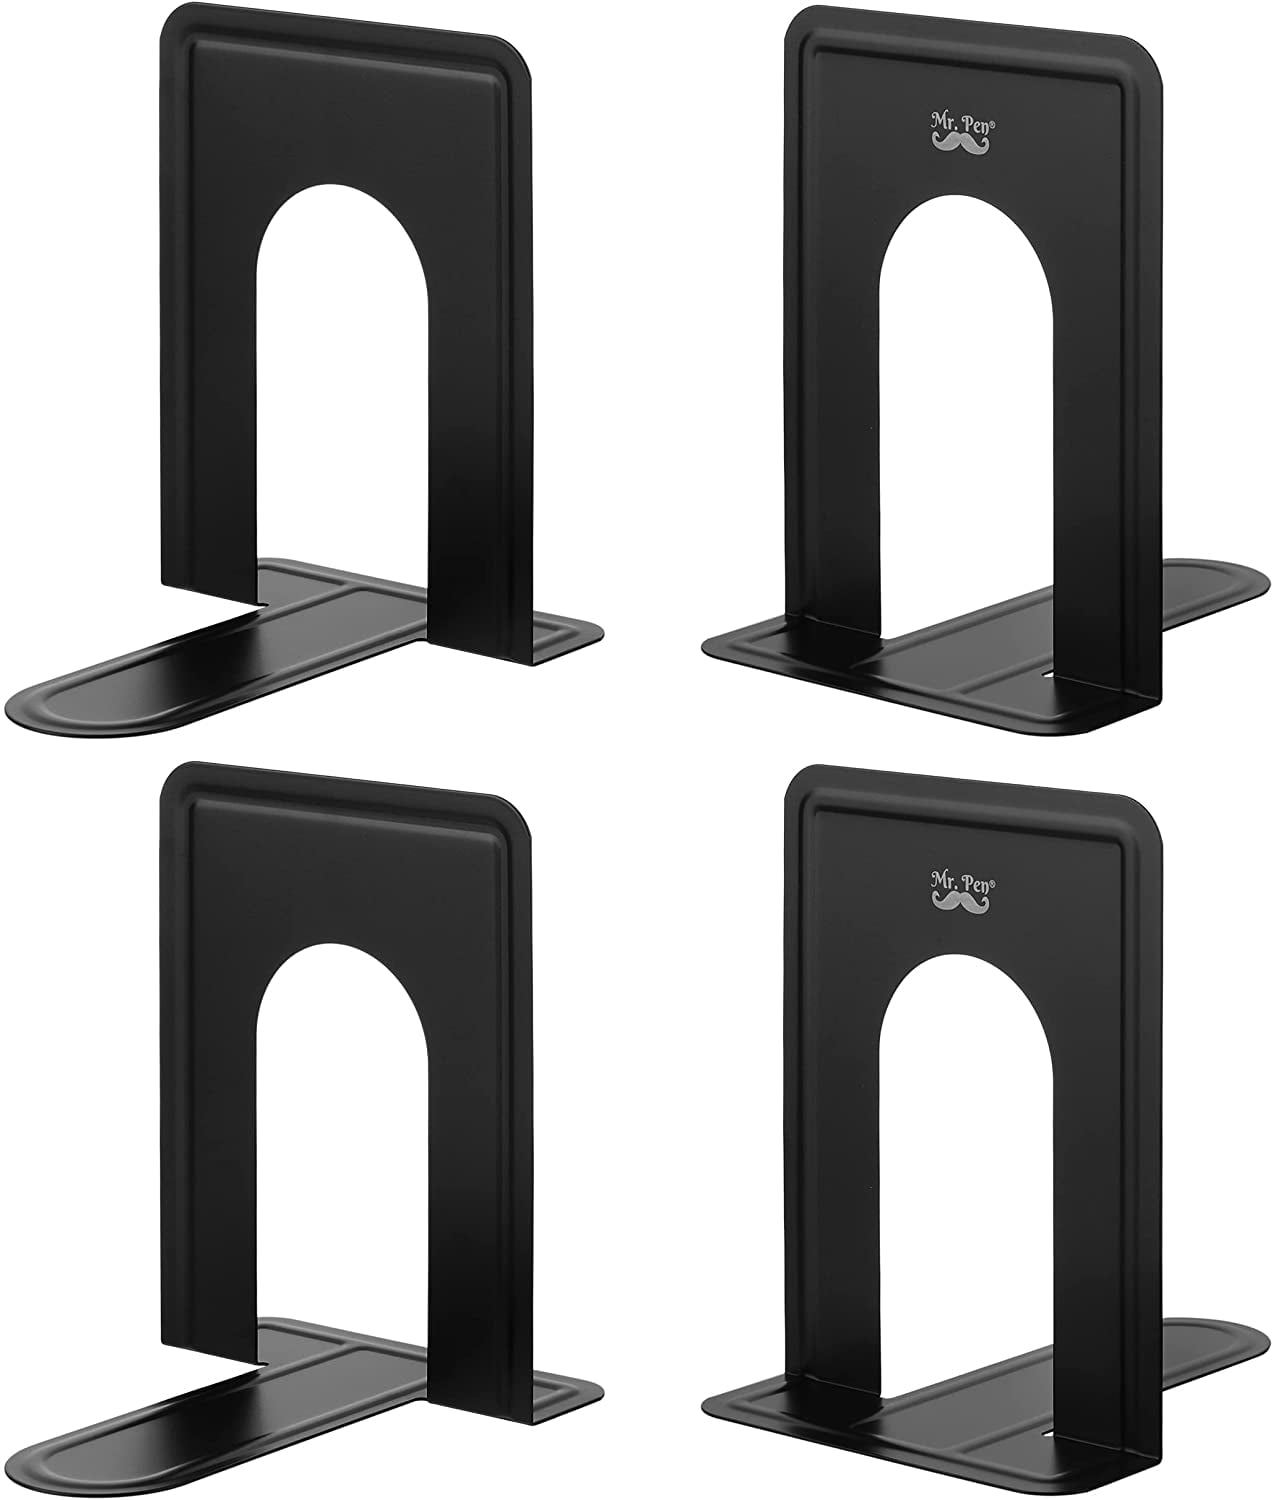 Book End Stopper Dividers for Shelves/Reader Stationery/Fathers Day Gift/Library Home Office School Decorative,Black Metal Bookends